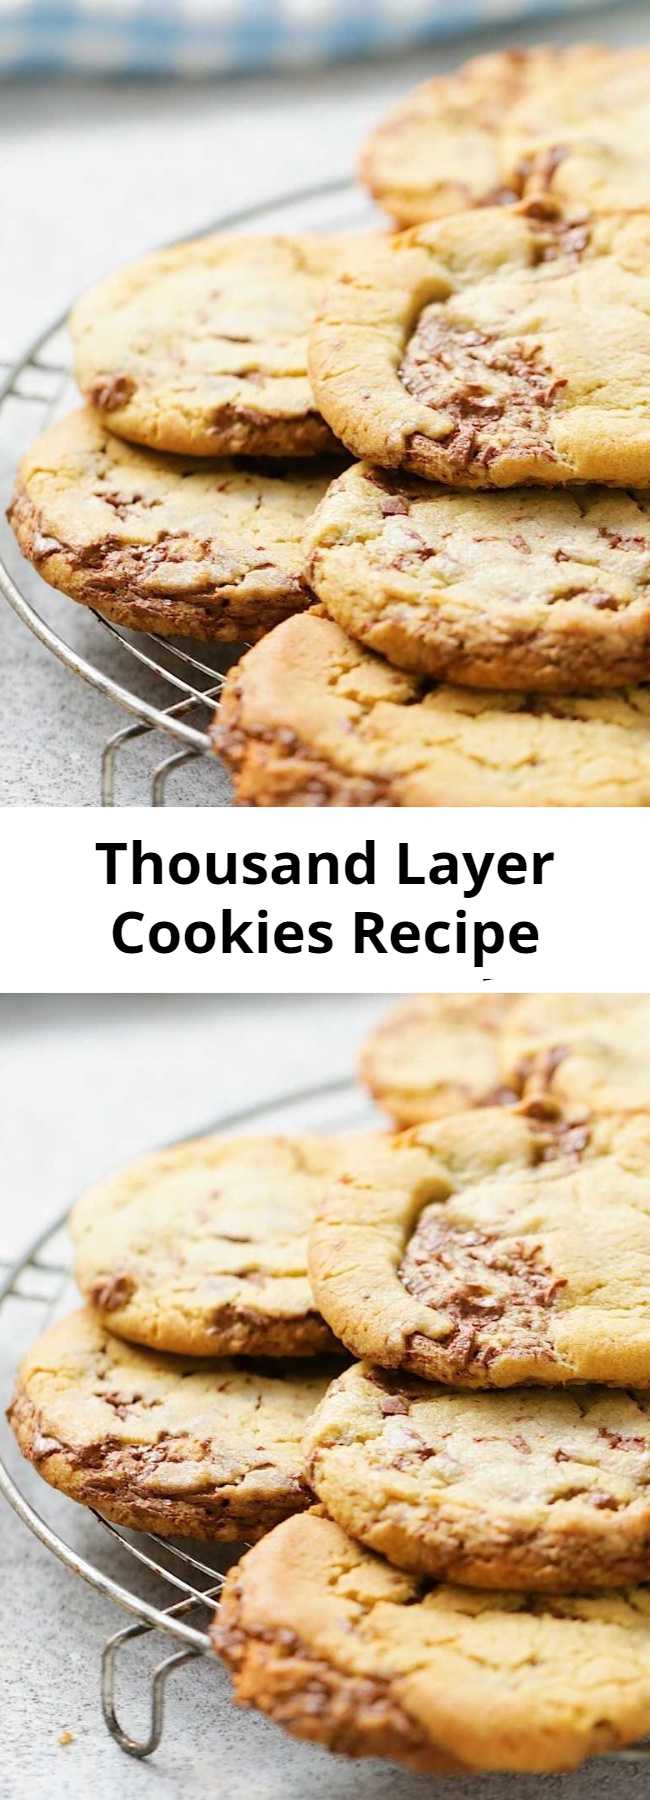 Thousand Layer Cookies Recipe - Little known fact: the name actually refers to how many of these you'll want to layer on your plate.